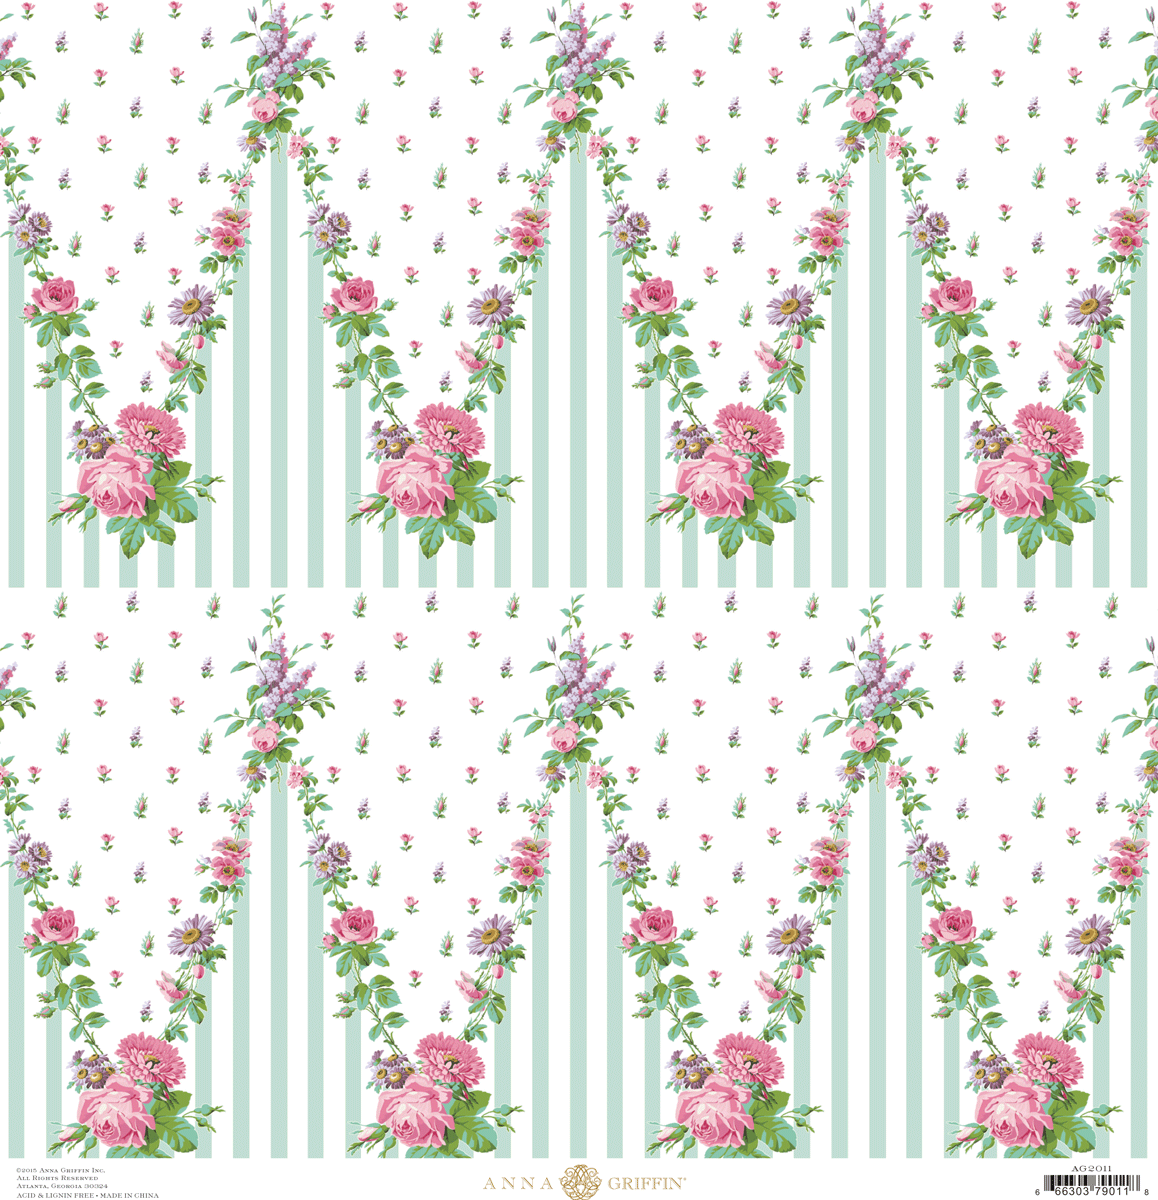 a pattern of pink flowers on a striped background.